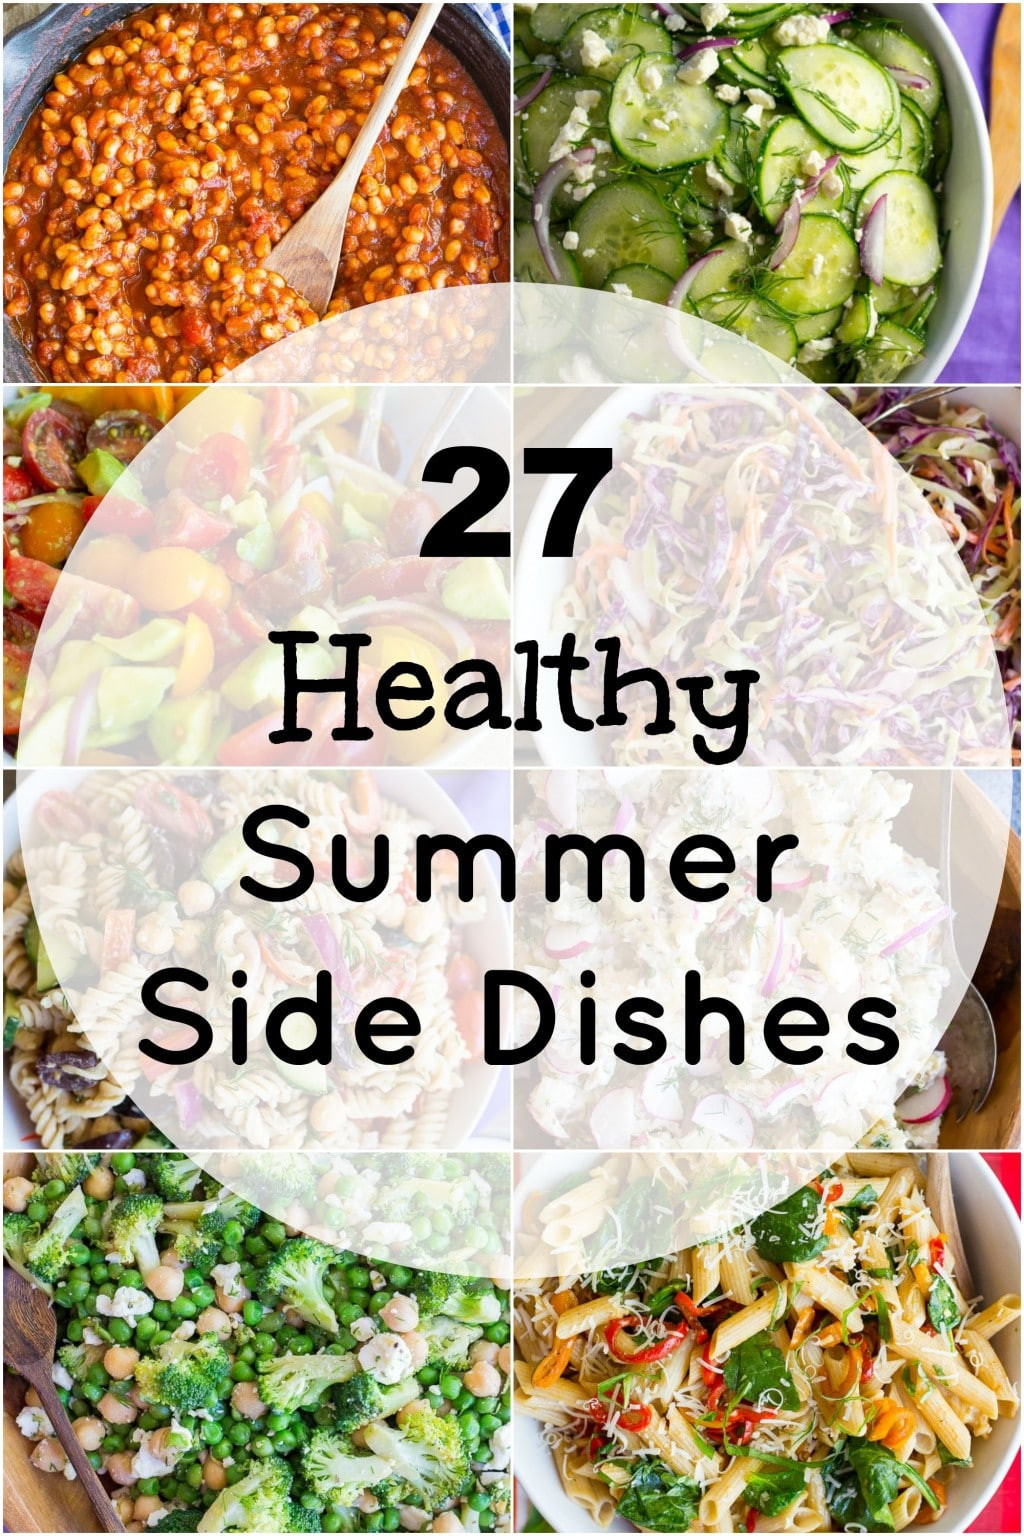 Healthy Side Dishes For Sandwiches
 27 Healthy Summer Side Dishes She Likes Food